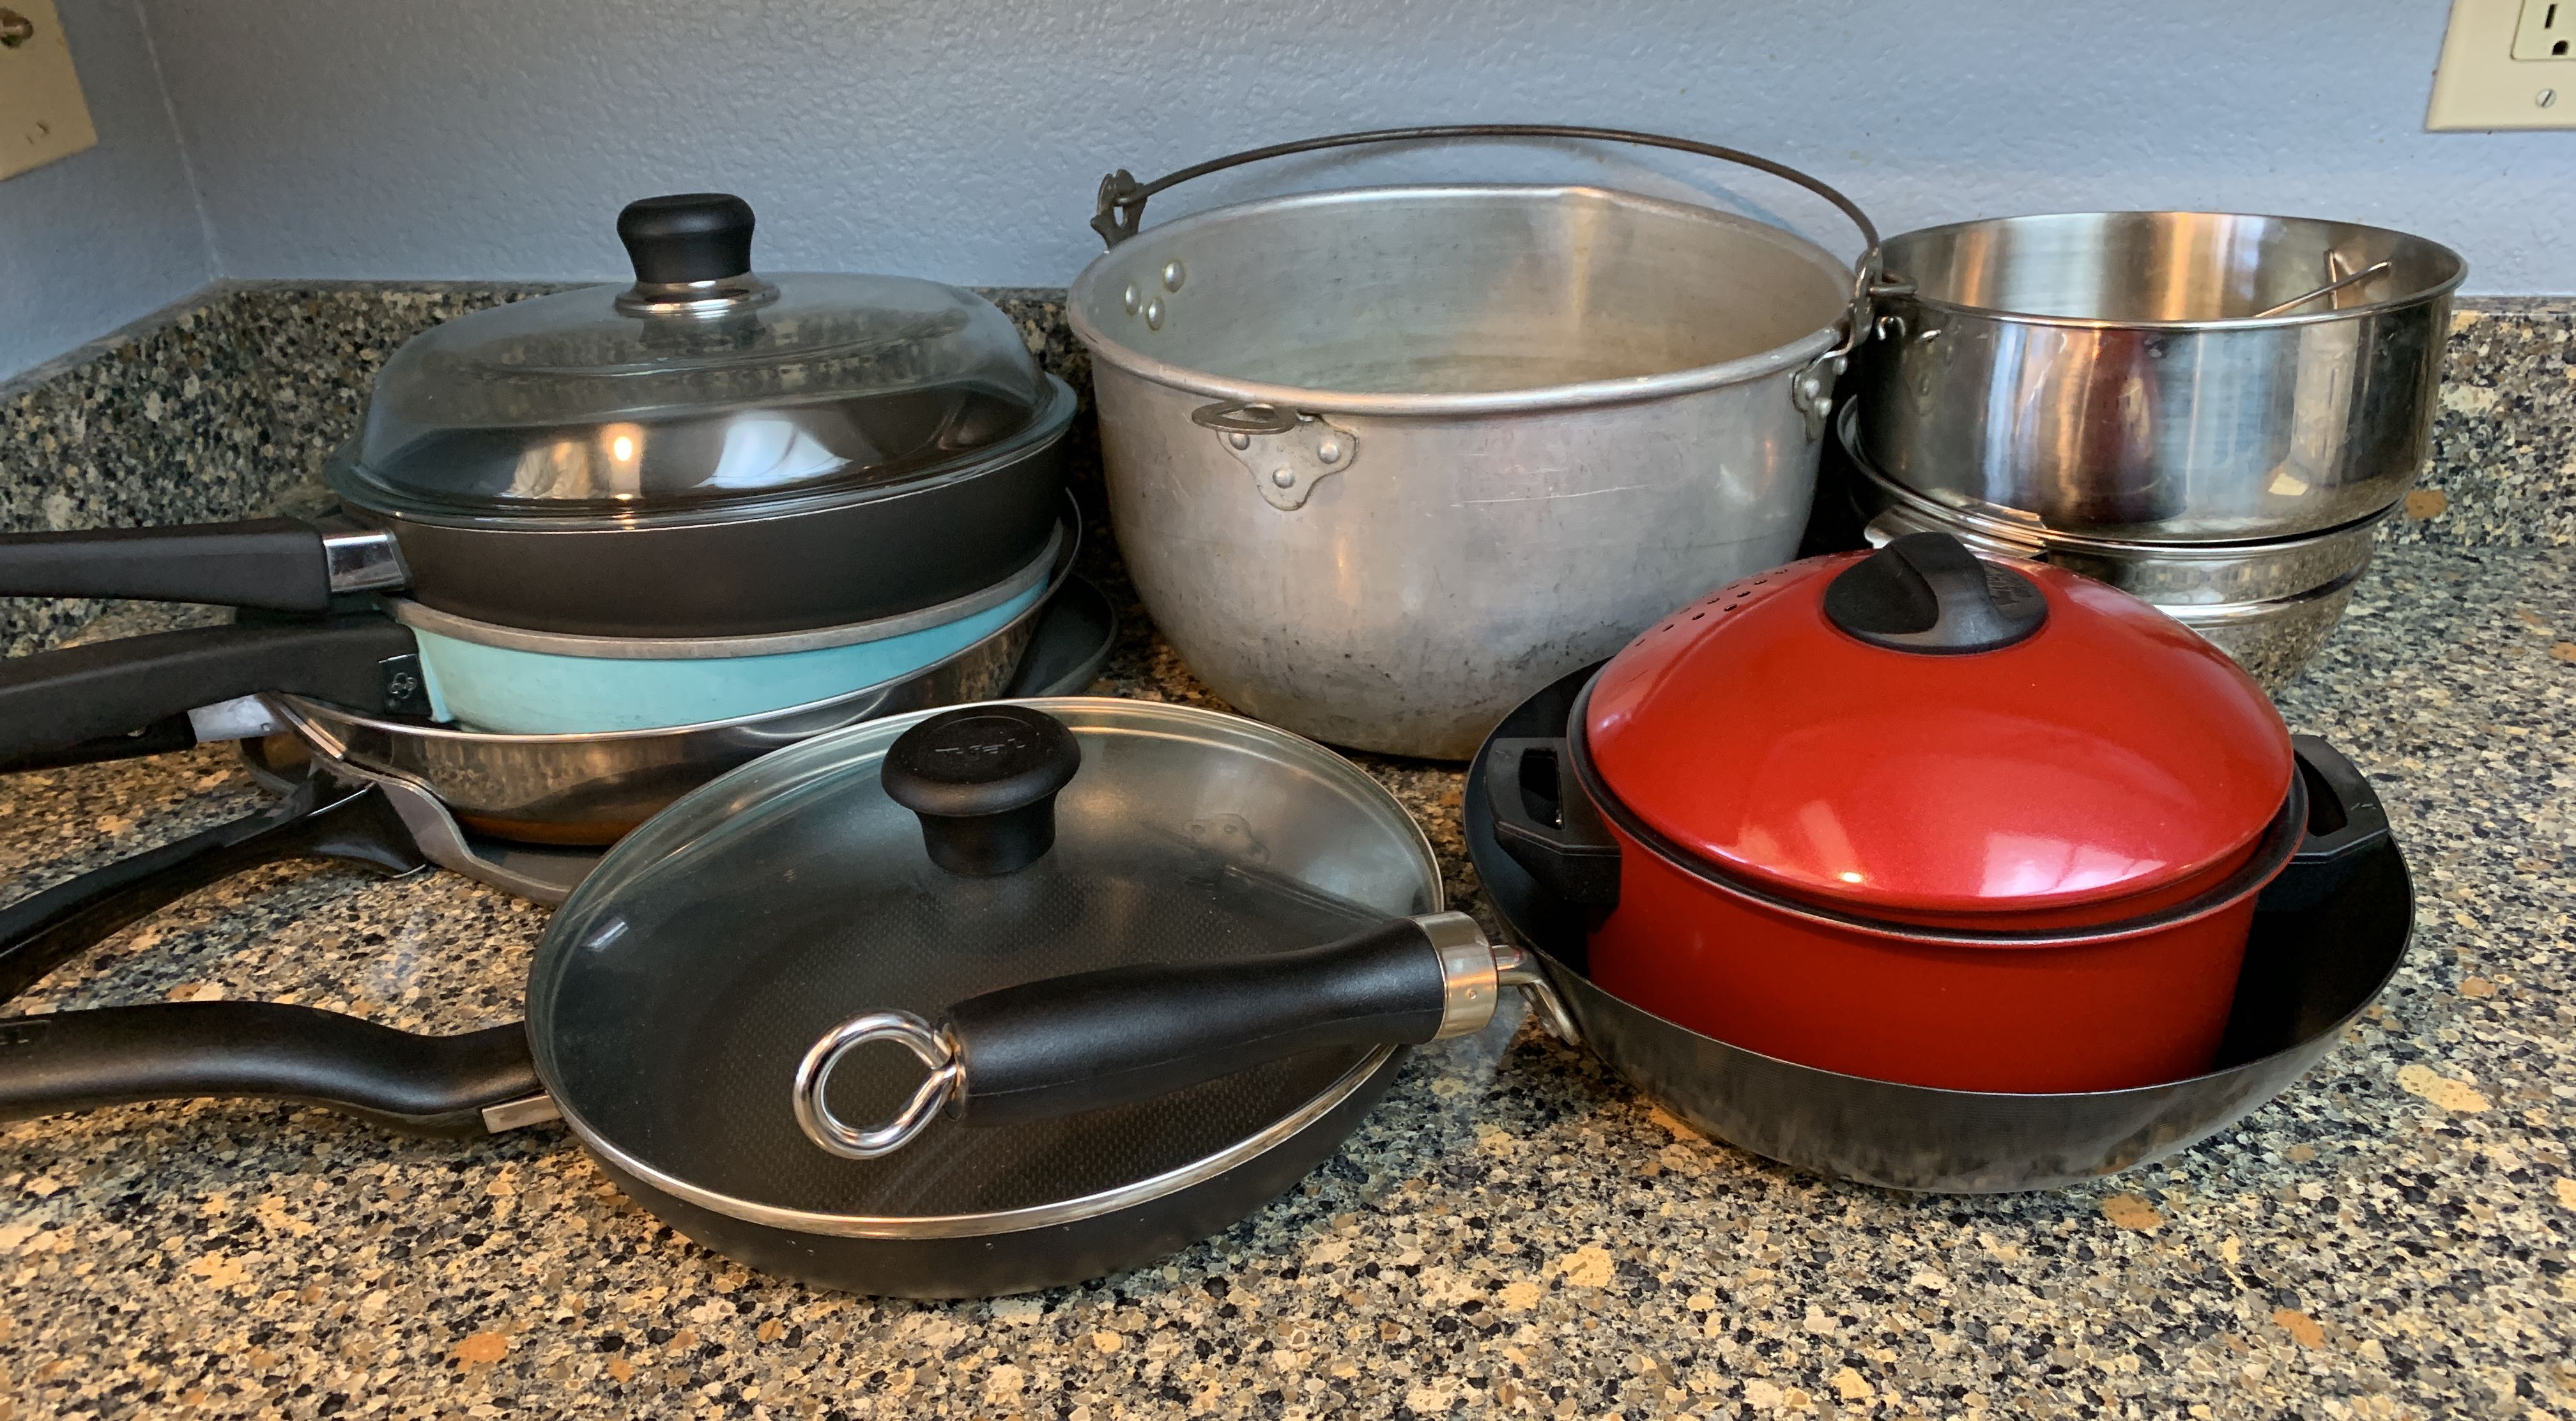 Magnalite, Comet, and West Bend Cookware, Four (4) for sale at auction on  20th February